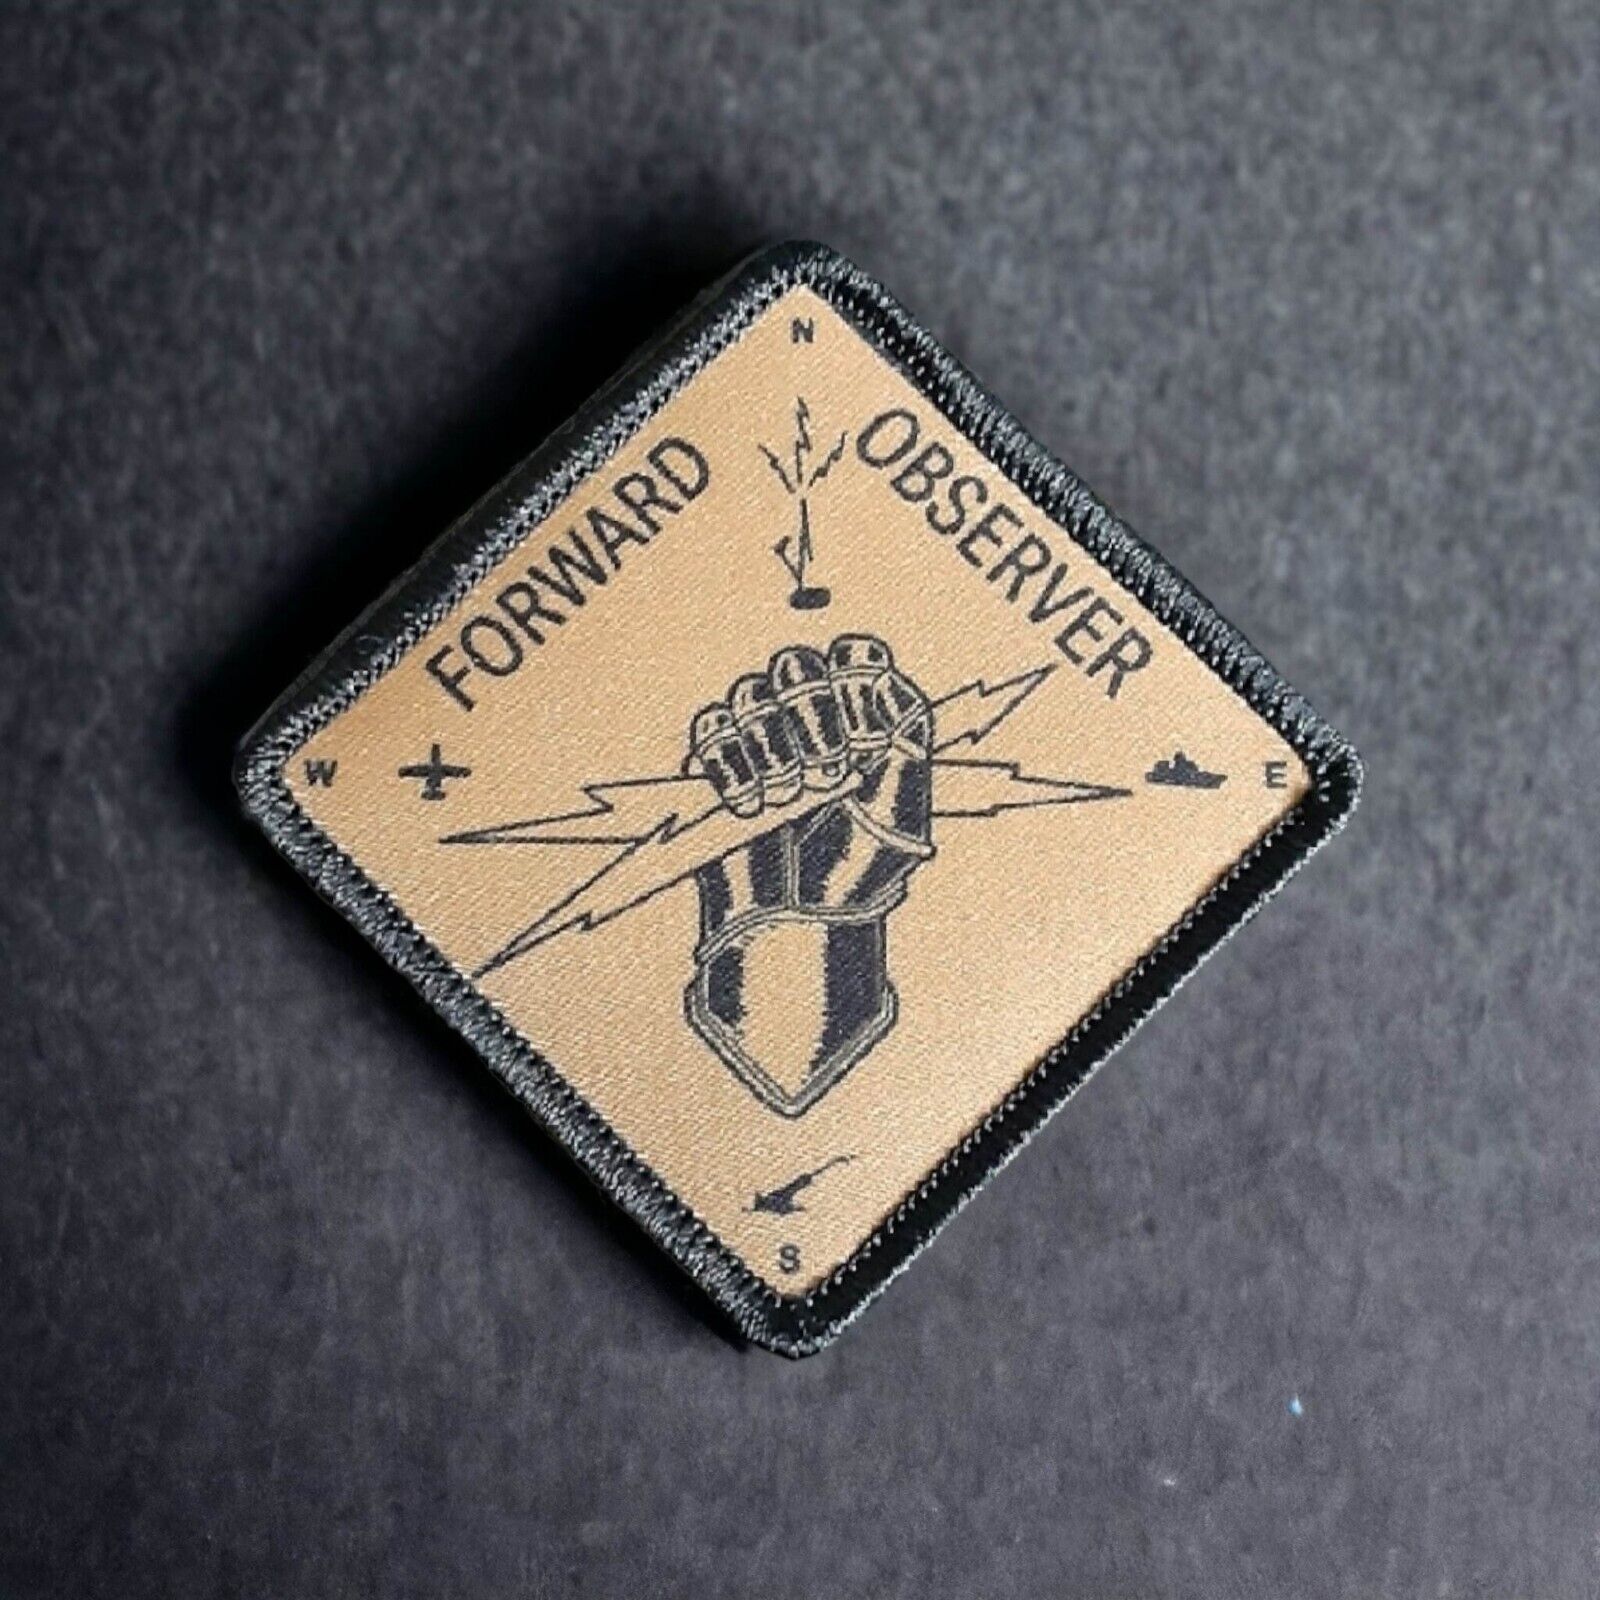 FIST patch forward observer army 13f Fister patch 